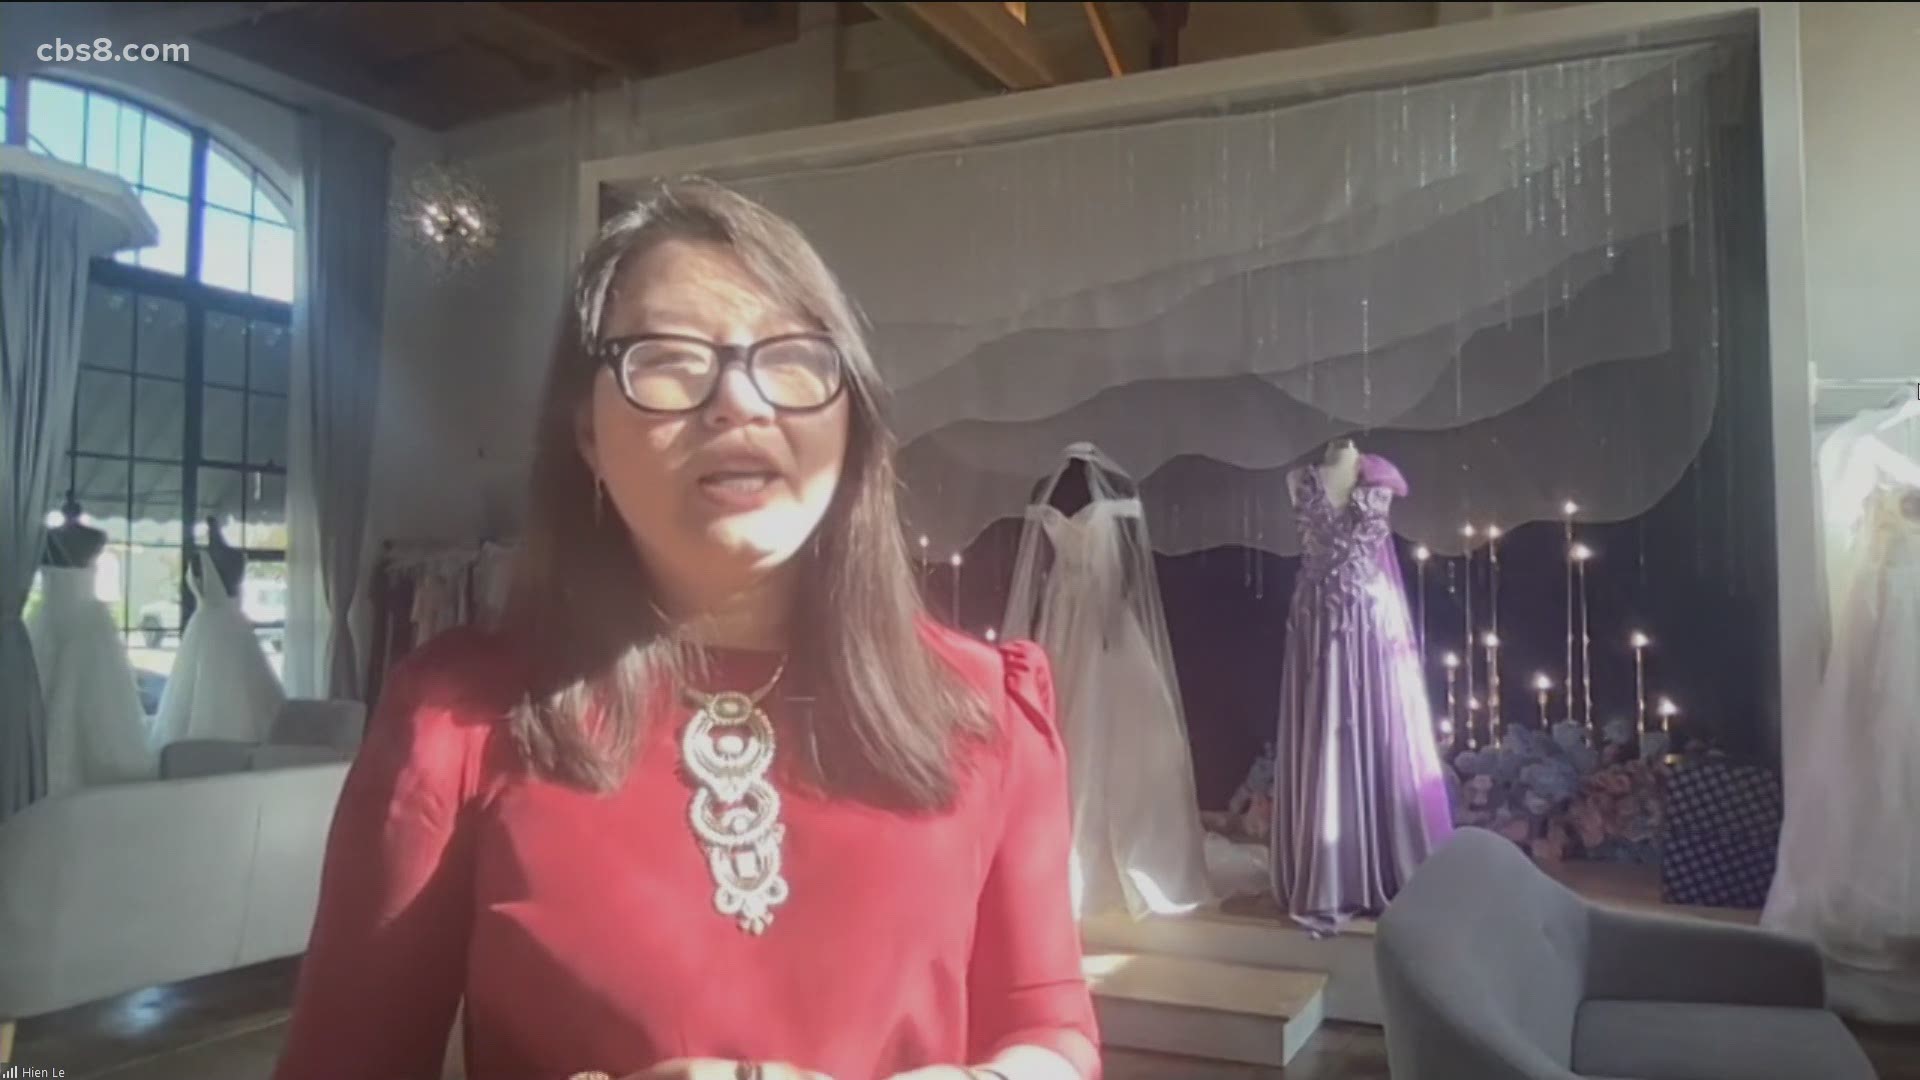 Hien Le from Dare and Dazzle joined Morning Extra to talk about the new trends that include renting a wedding dress!